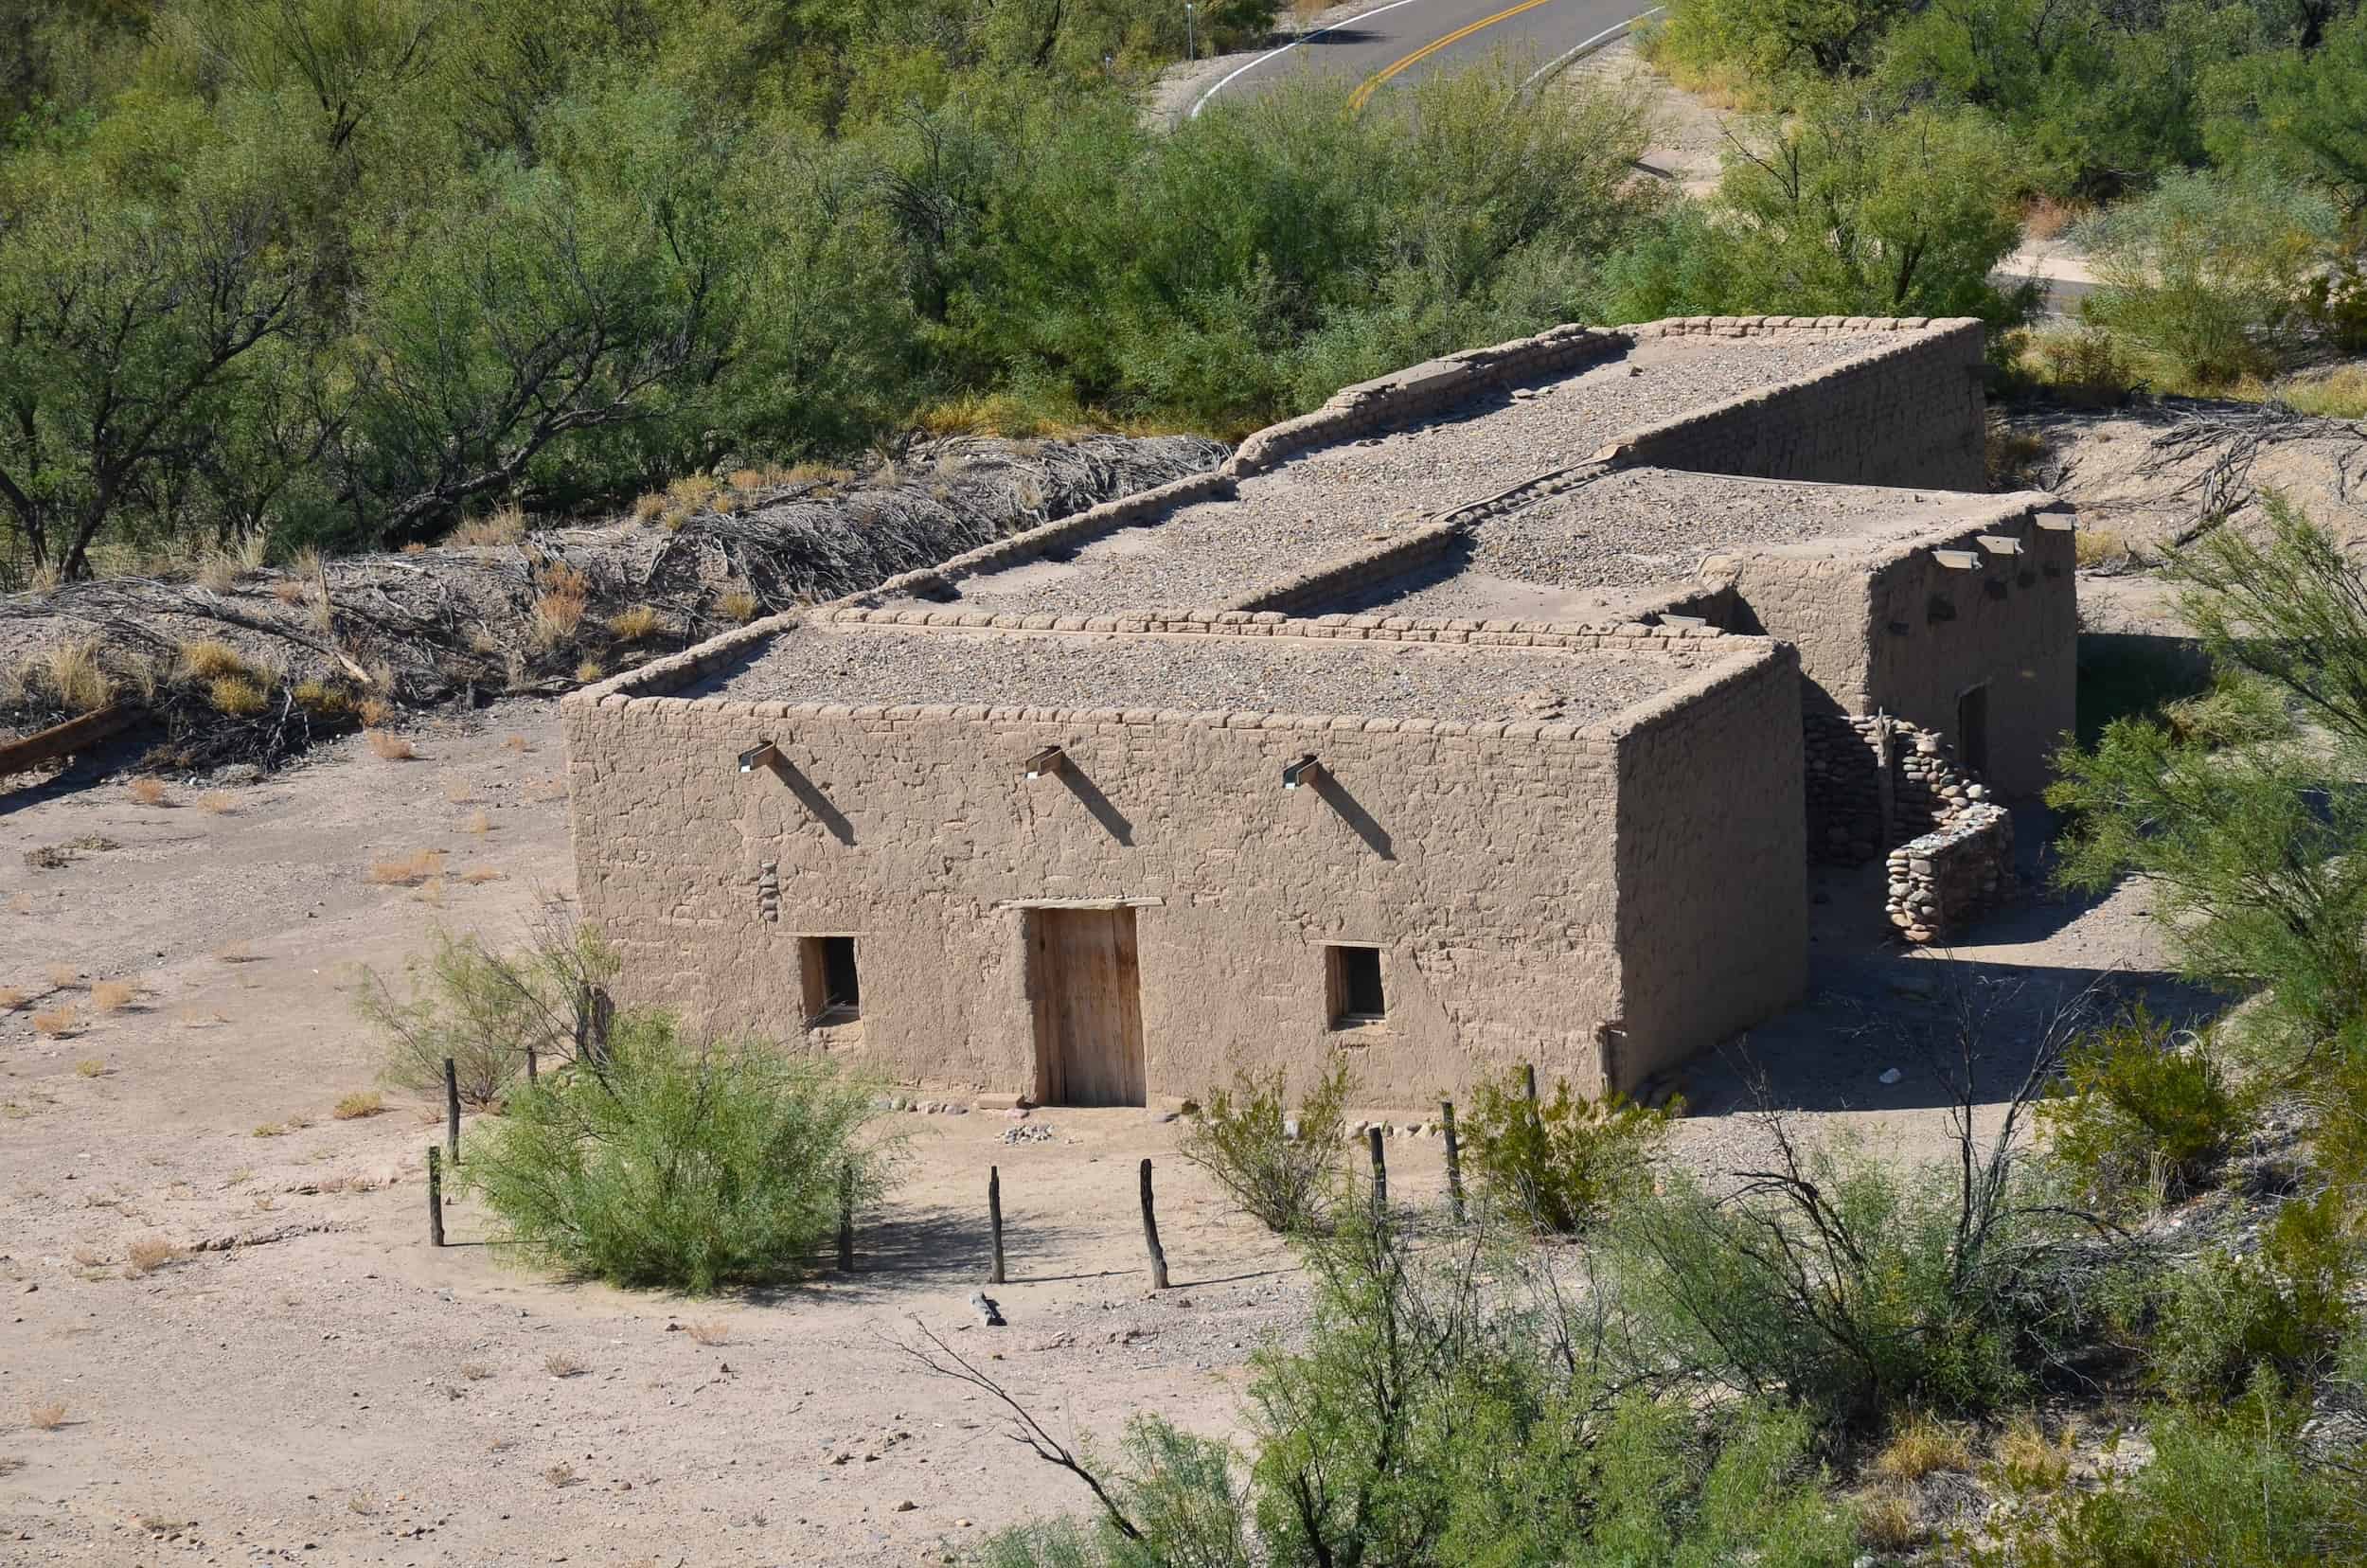 Alvino House at Castolon in Big Bend National Park in Texas